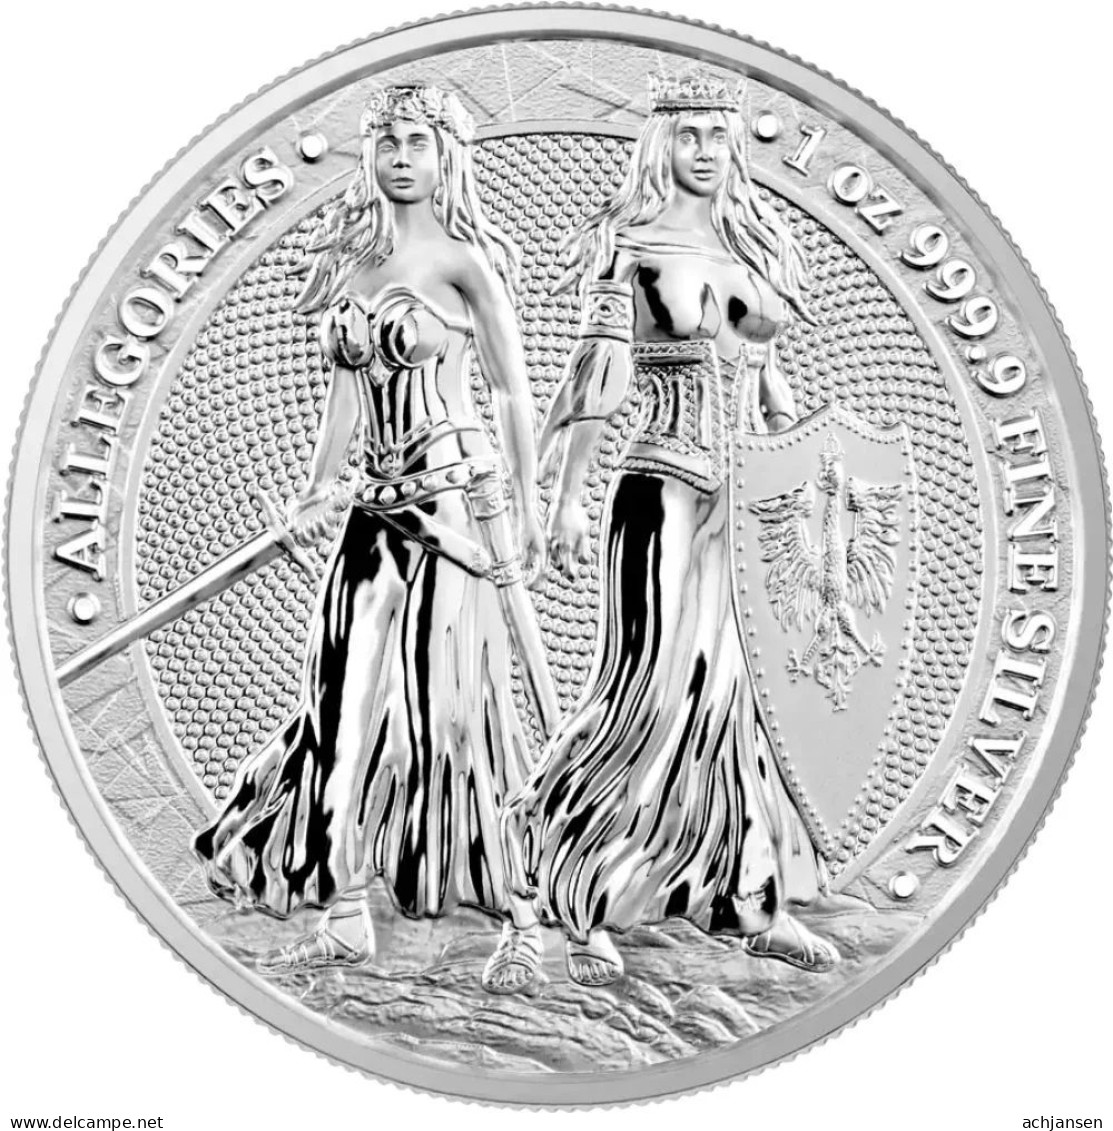 Germany, set of 4 Germania and Allegories - each 1 OZ. pure silver